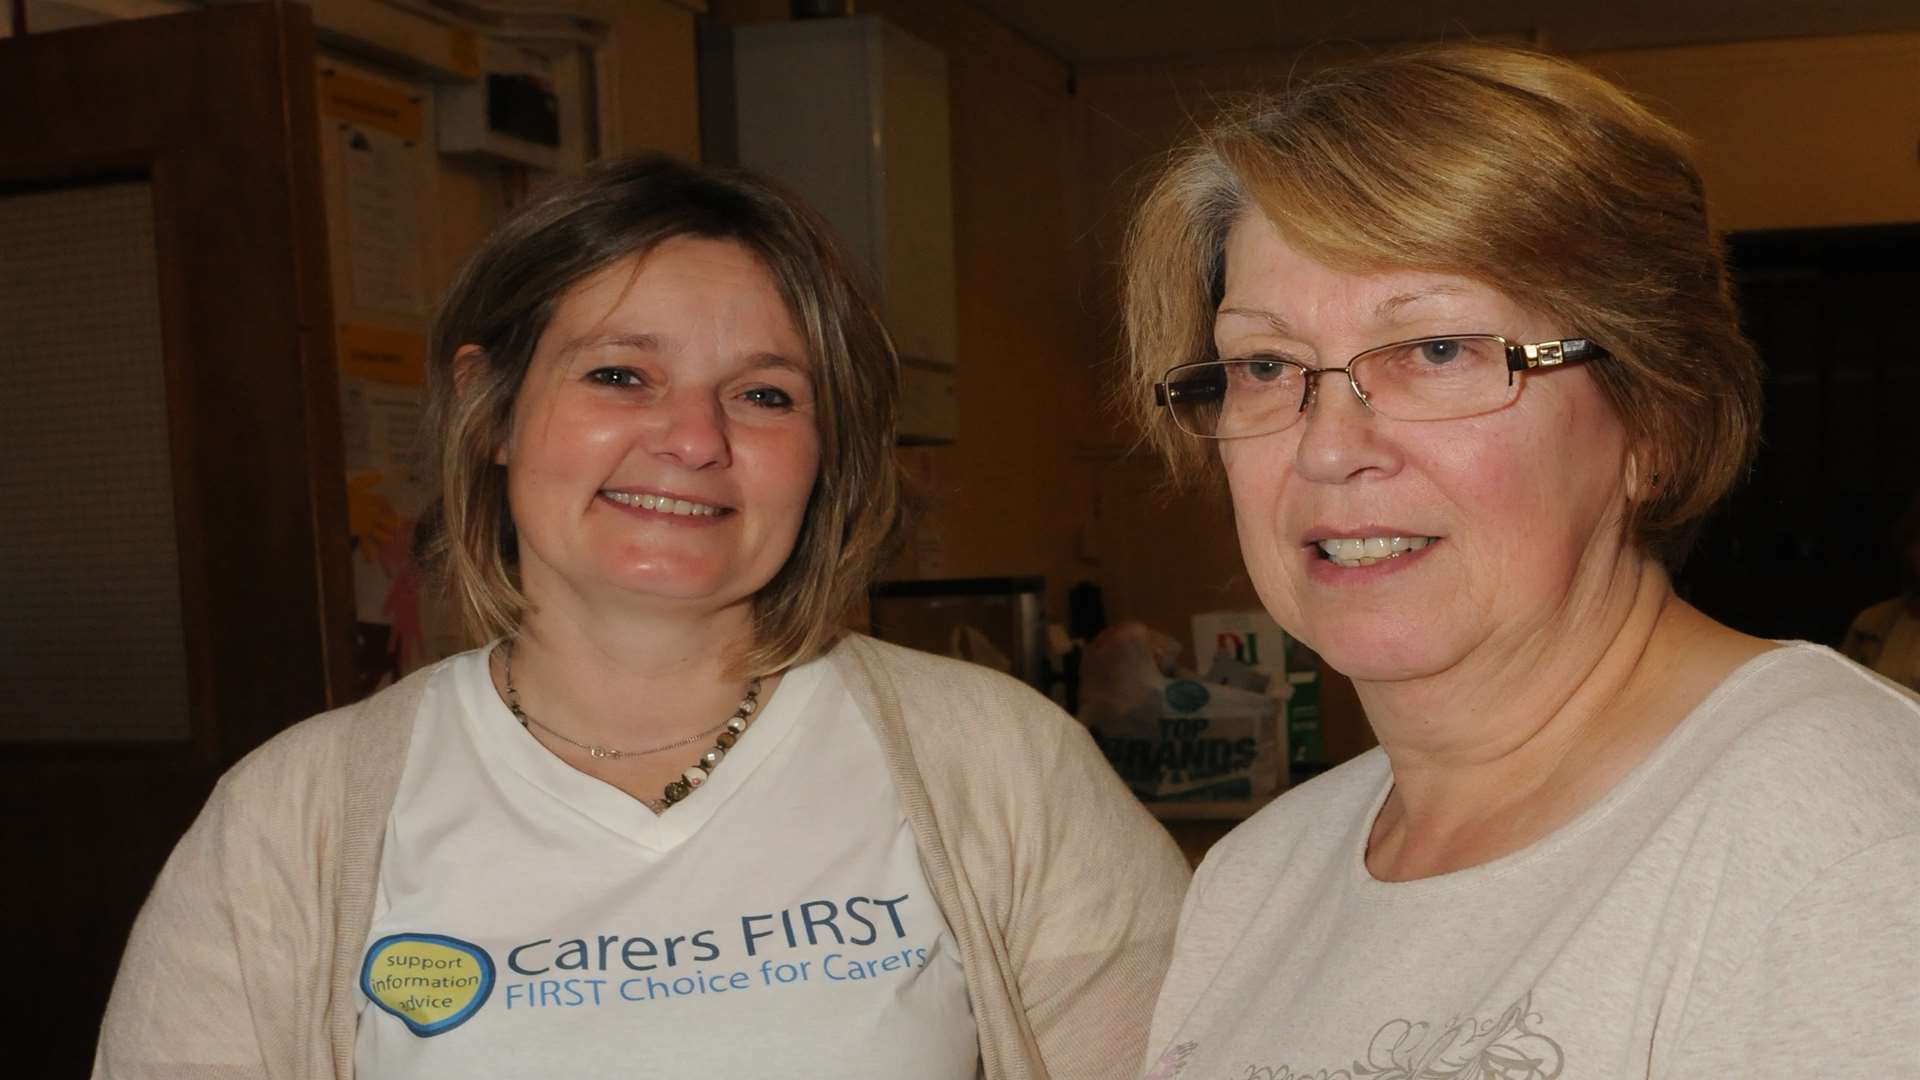 Carers First event. L-R: Amy Weaver and Cath Simms